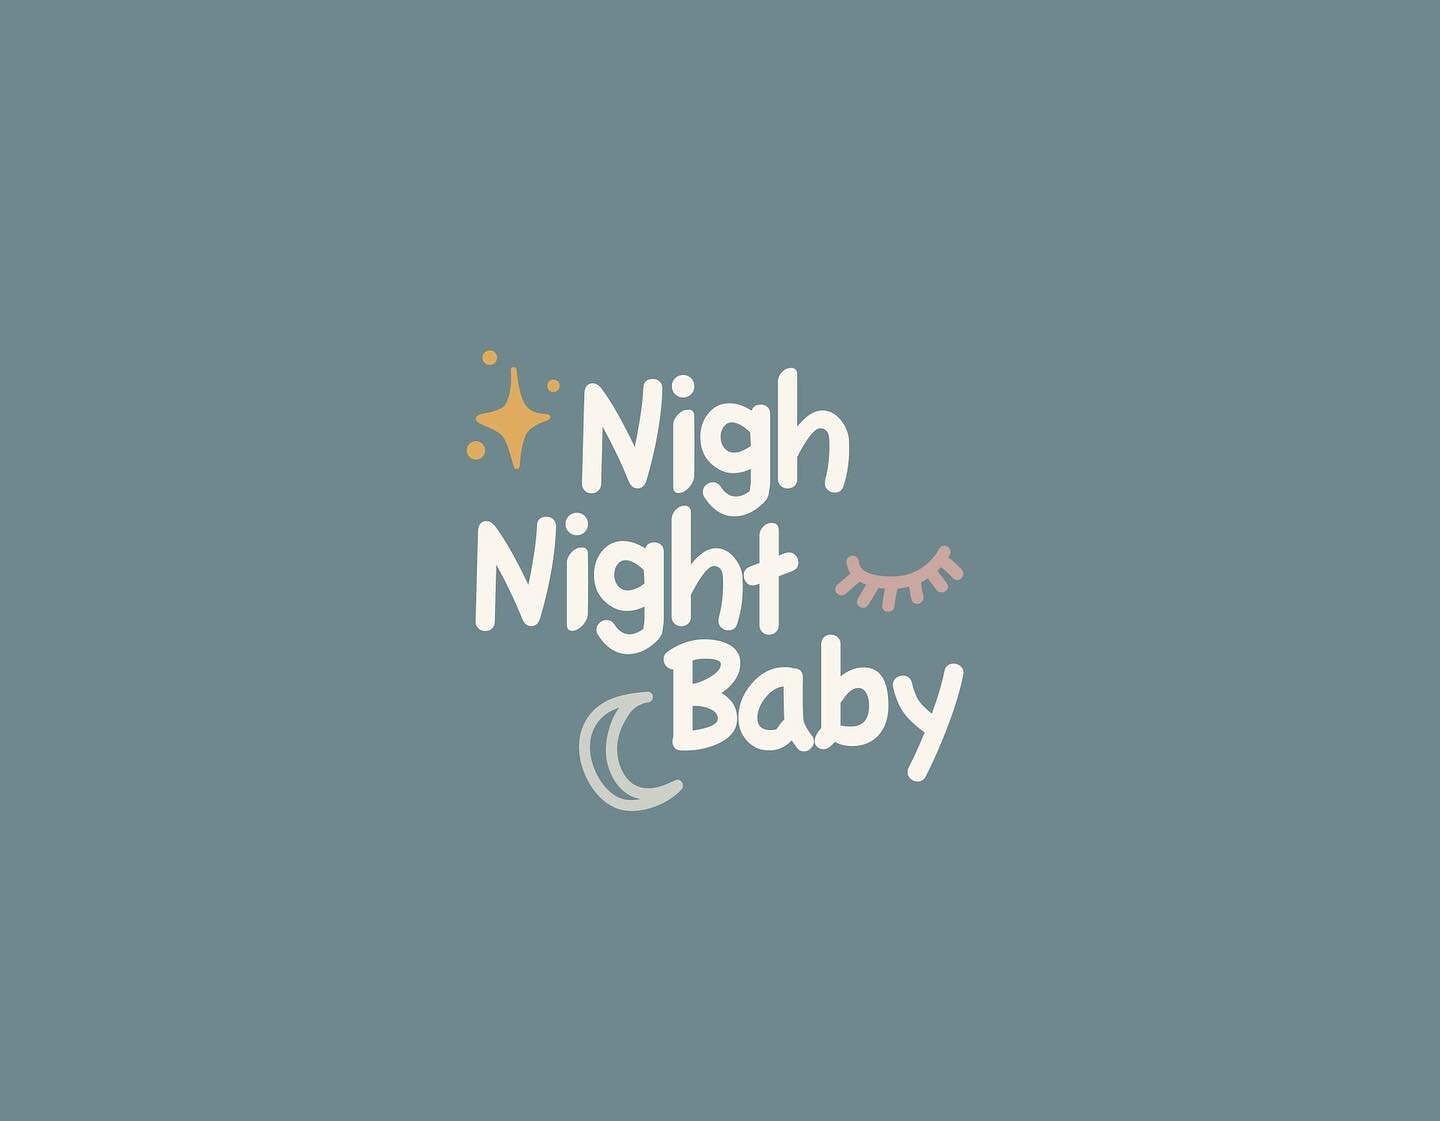 A fun lil logo from a while back for @nighnightbaby check them out!  #logo